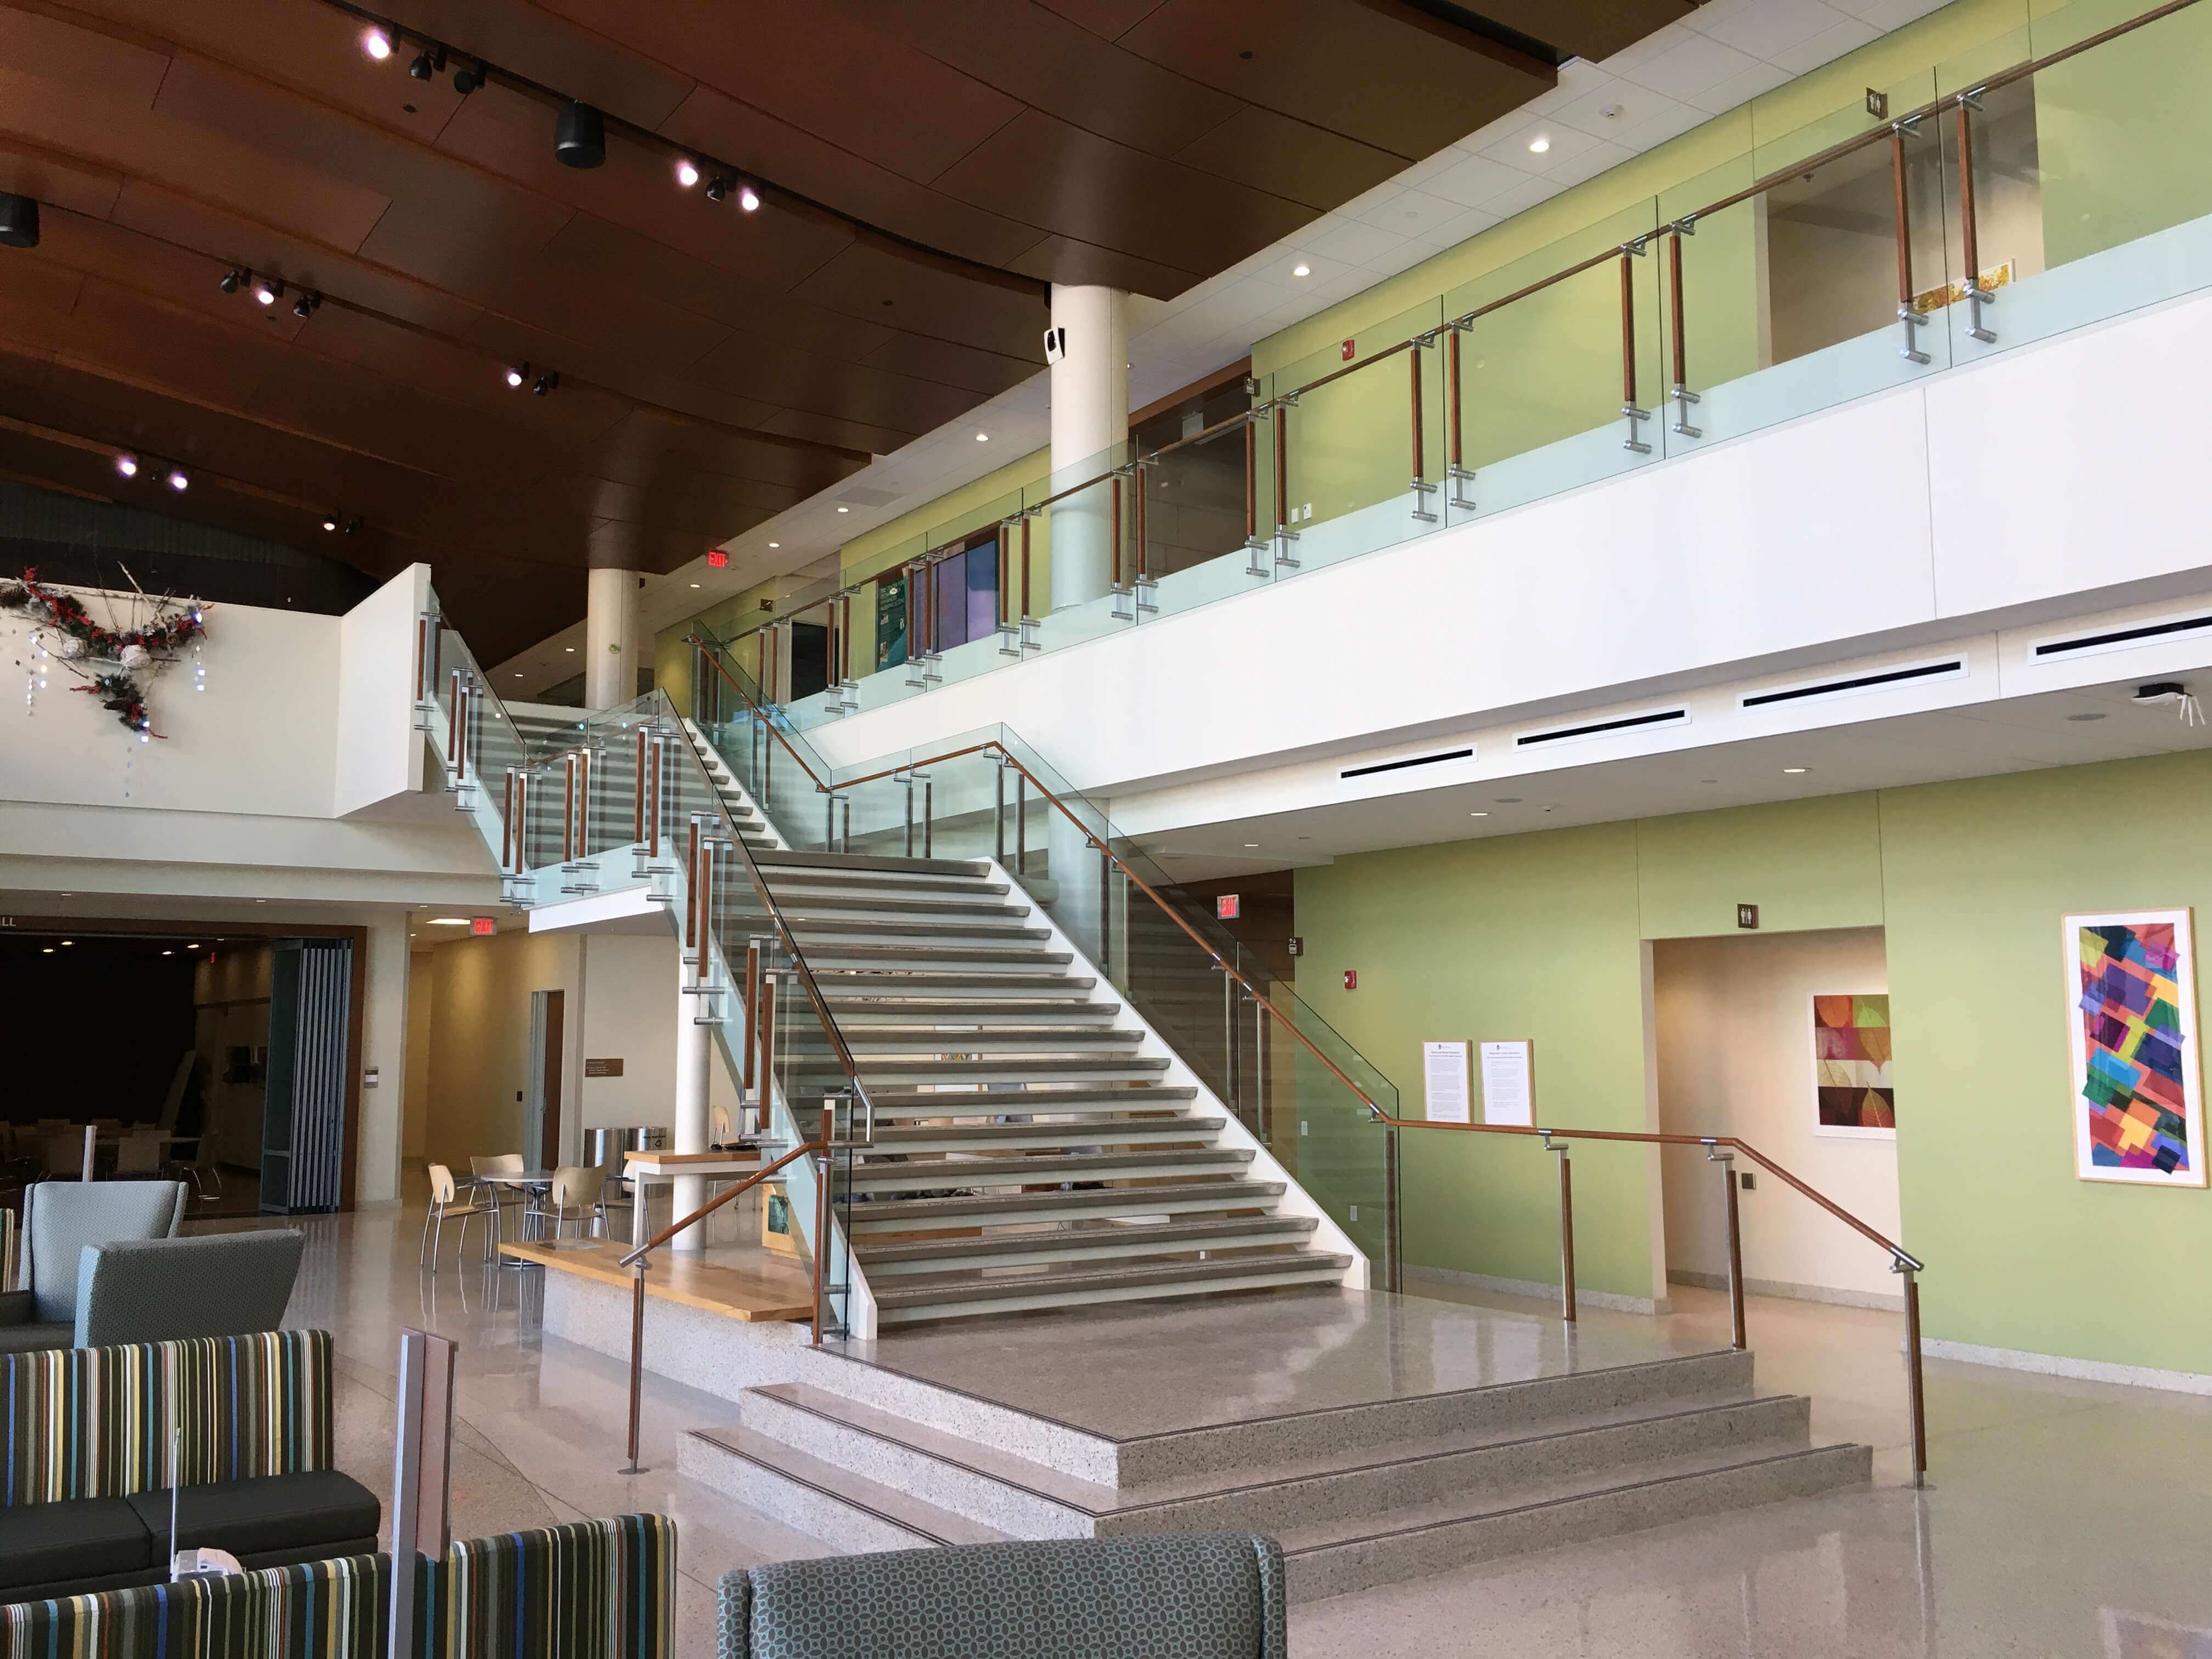 Atrium stair at University of Wisconsin School of Nursing, Kubit glass railing with wood top rail and posts.